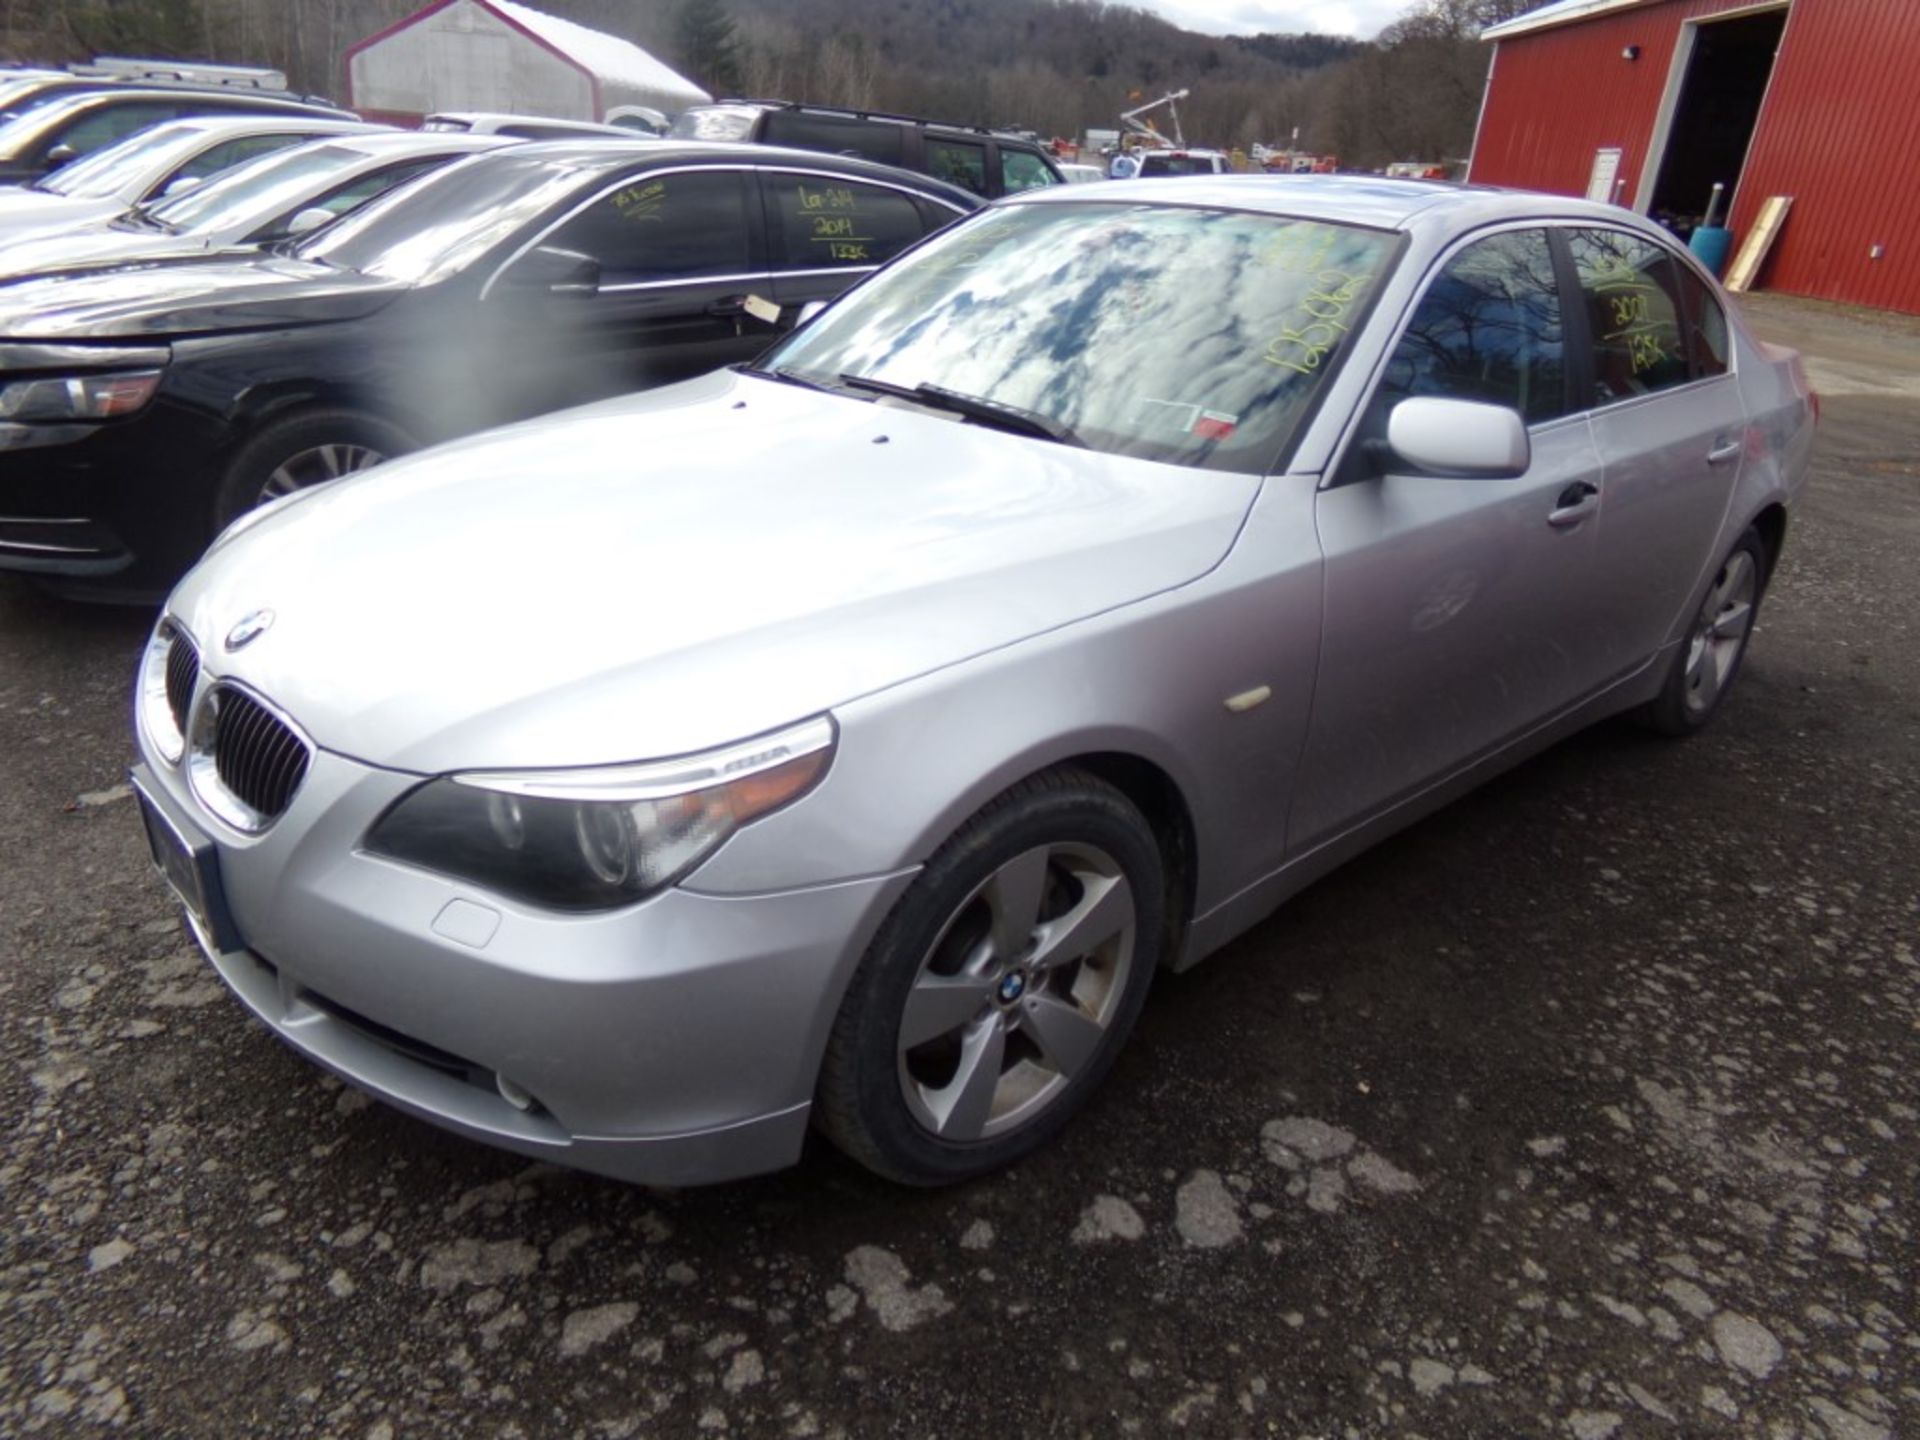 2007 BMW 530XI, AWD, Leather, Sunroof, Silver, 125,062 Miles, VIN#WBANF73557CU22632 - OPEN TO ALL